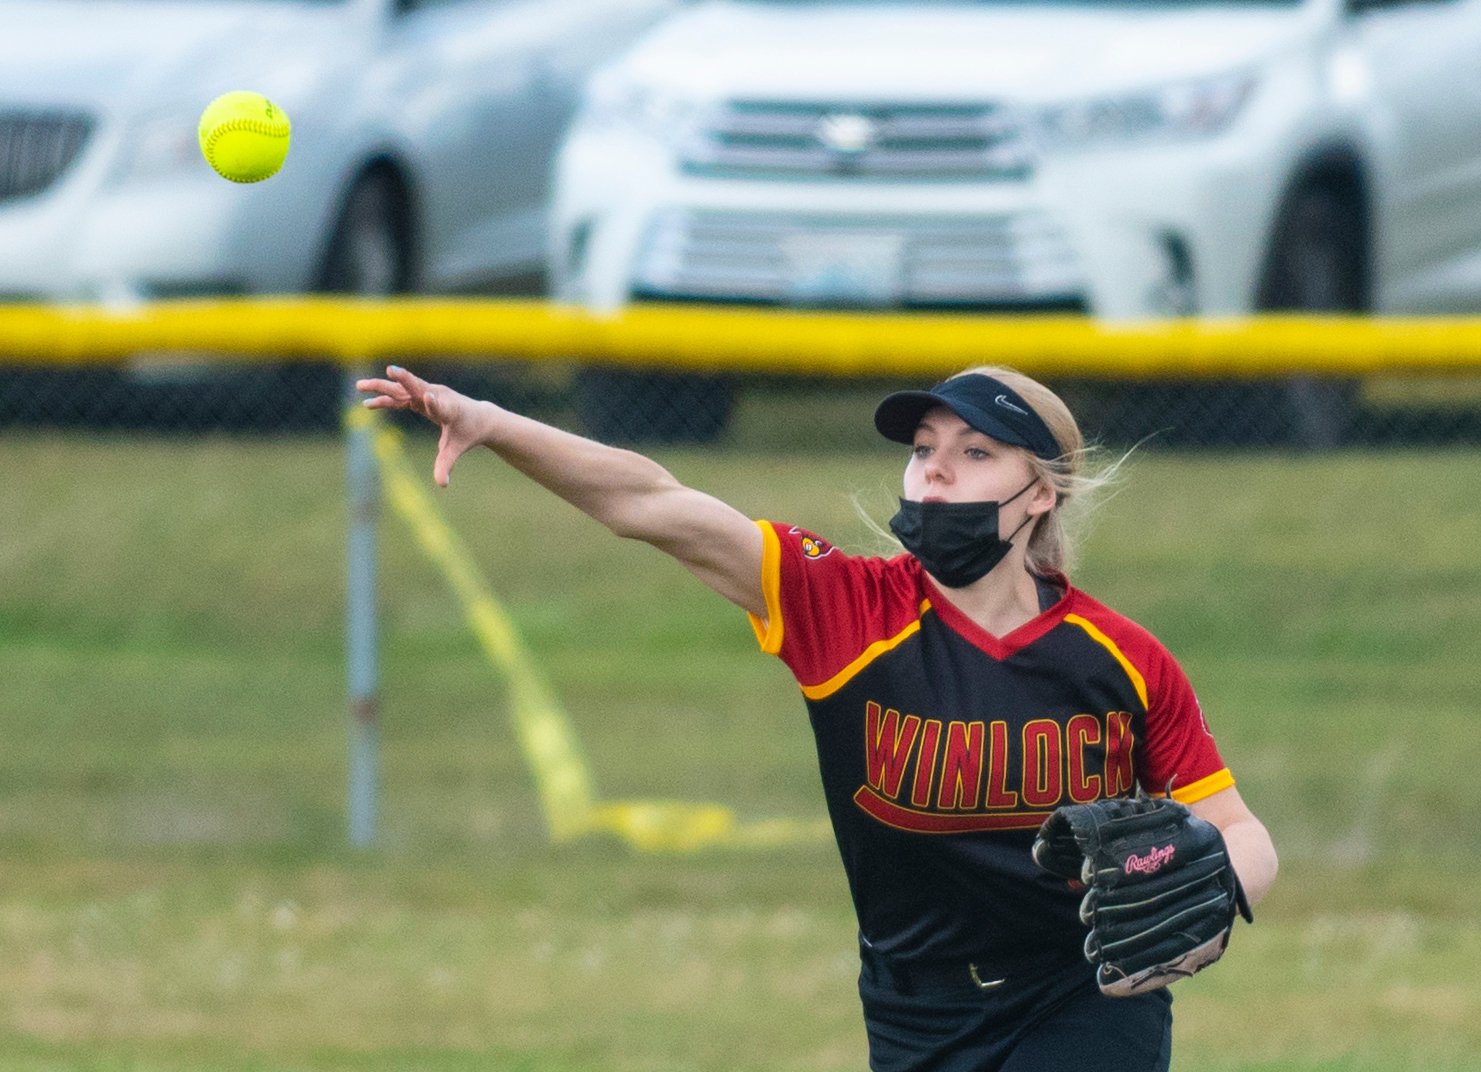 Winlock center fielder Maia Chaney makes a throw from the outfield on Thursday.